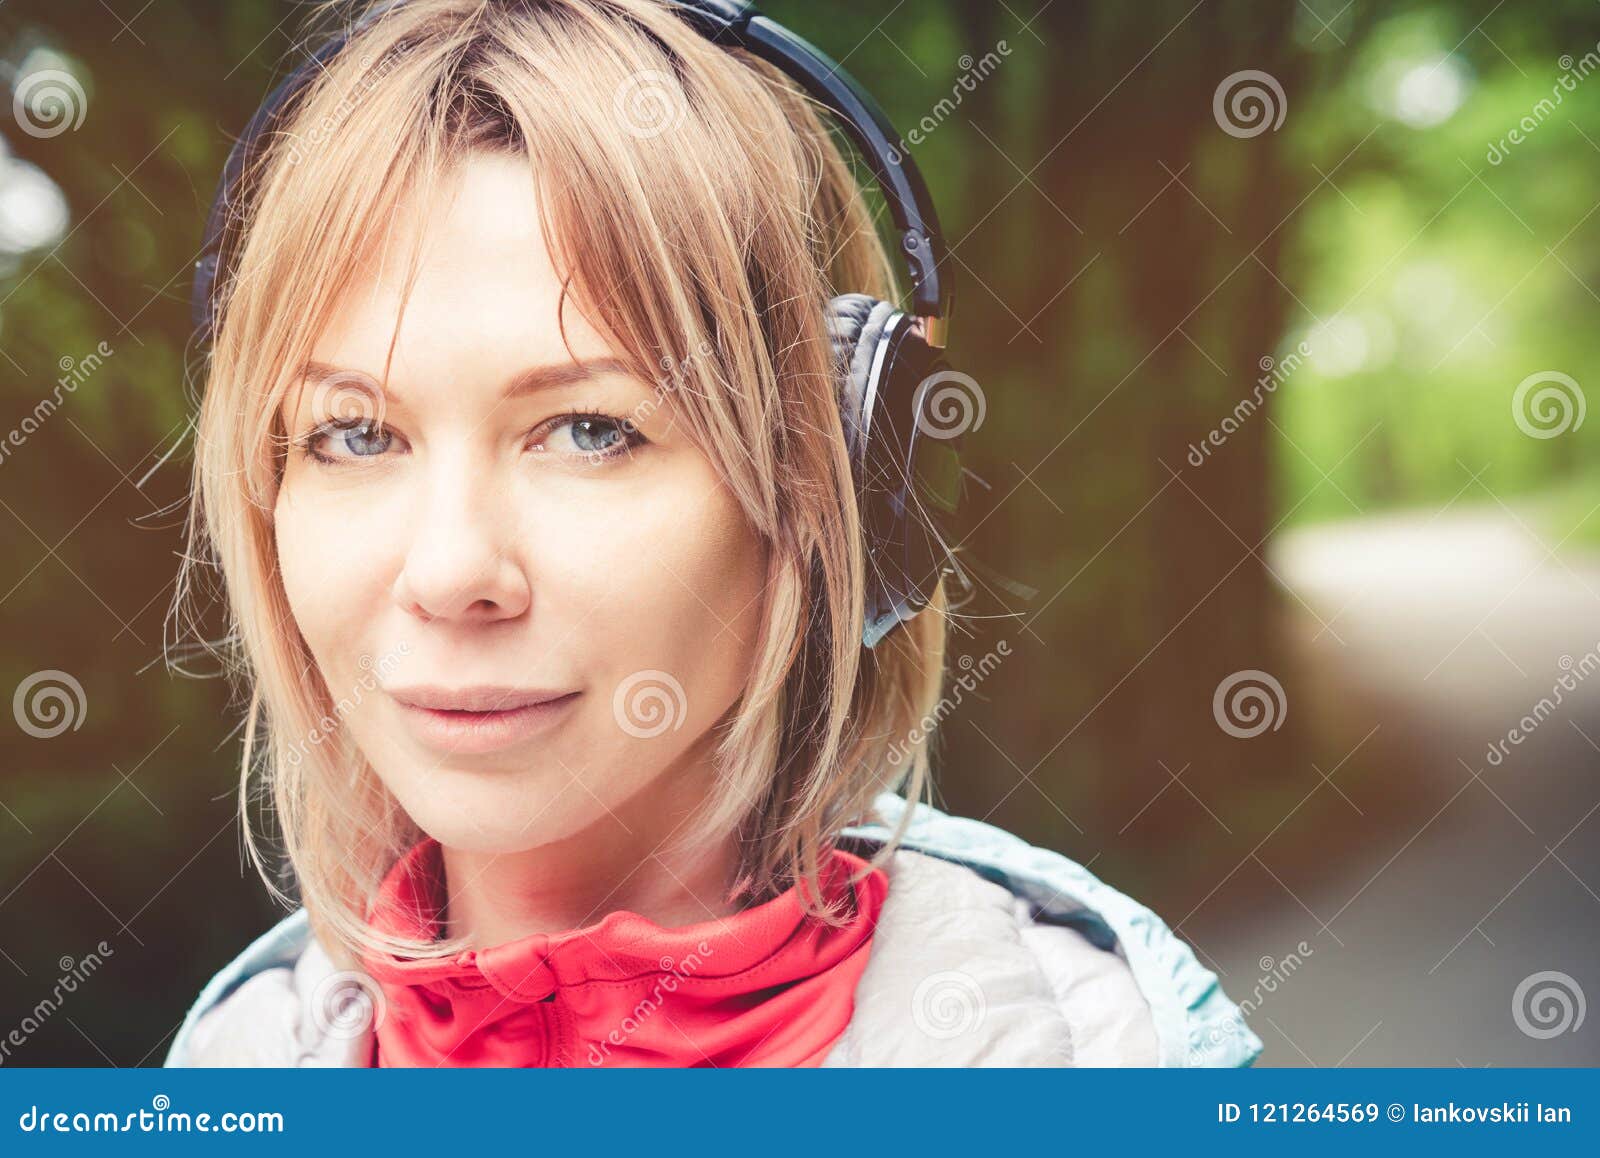 Attractive Blond Woman In The Forest Close Up Portrait Of A Sporty Smiling Girl Listening To 